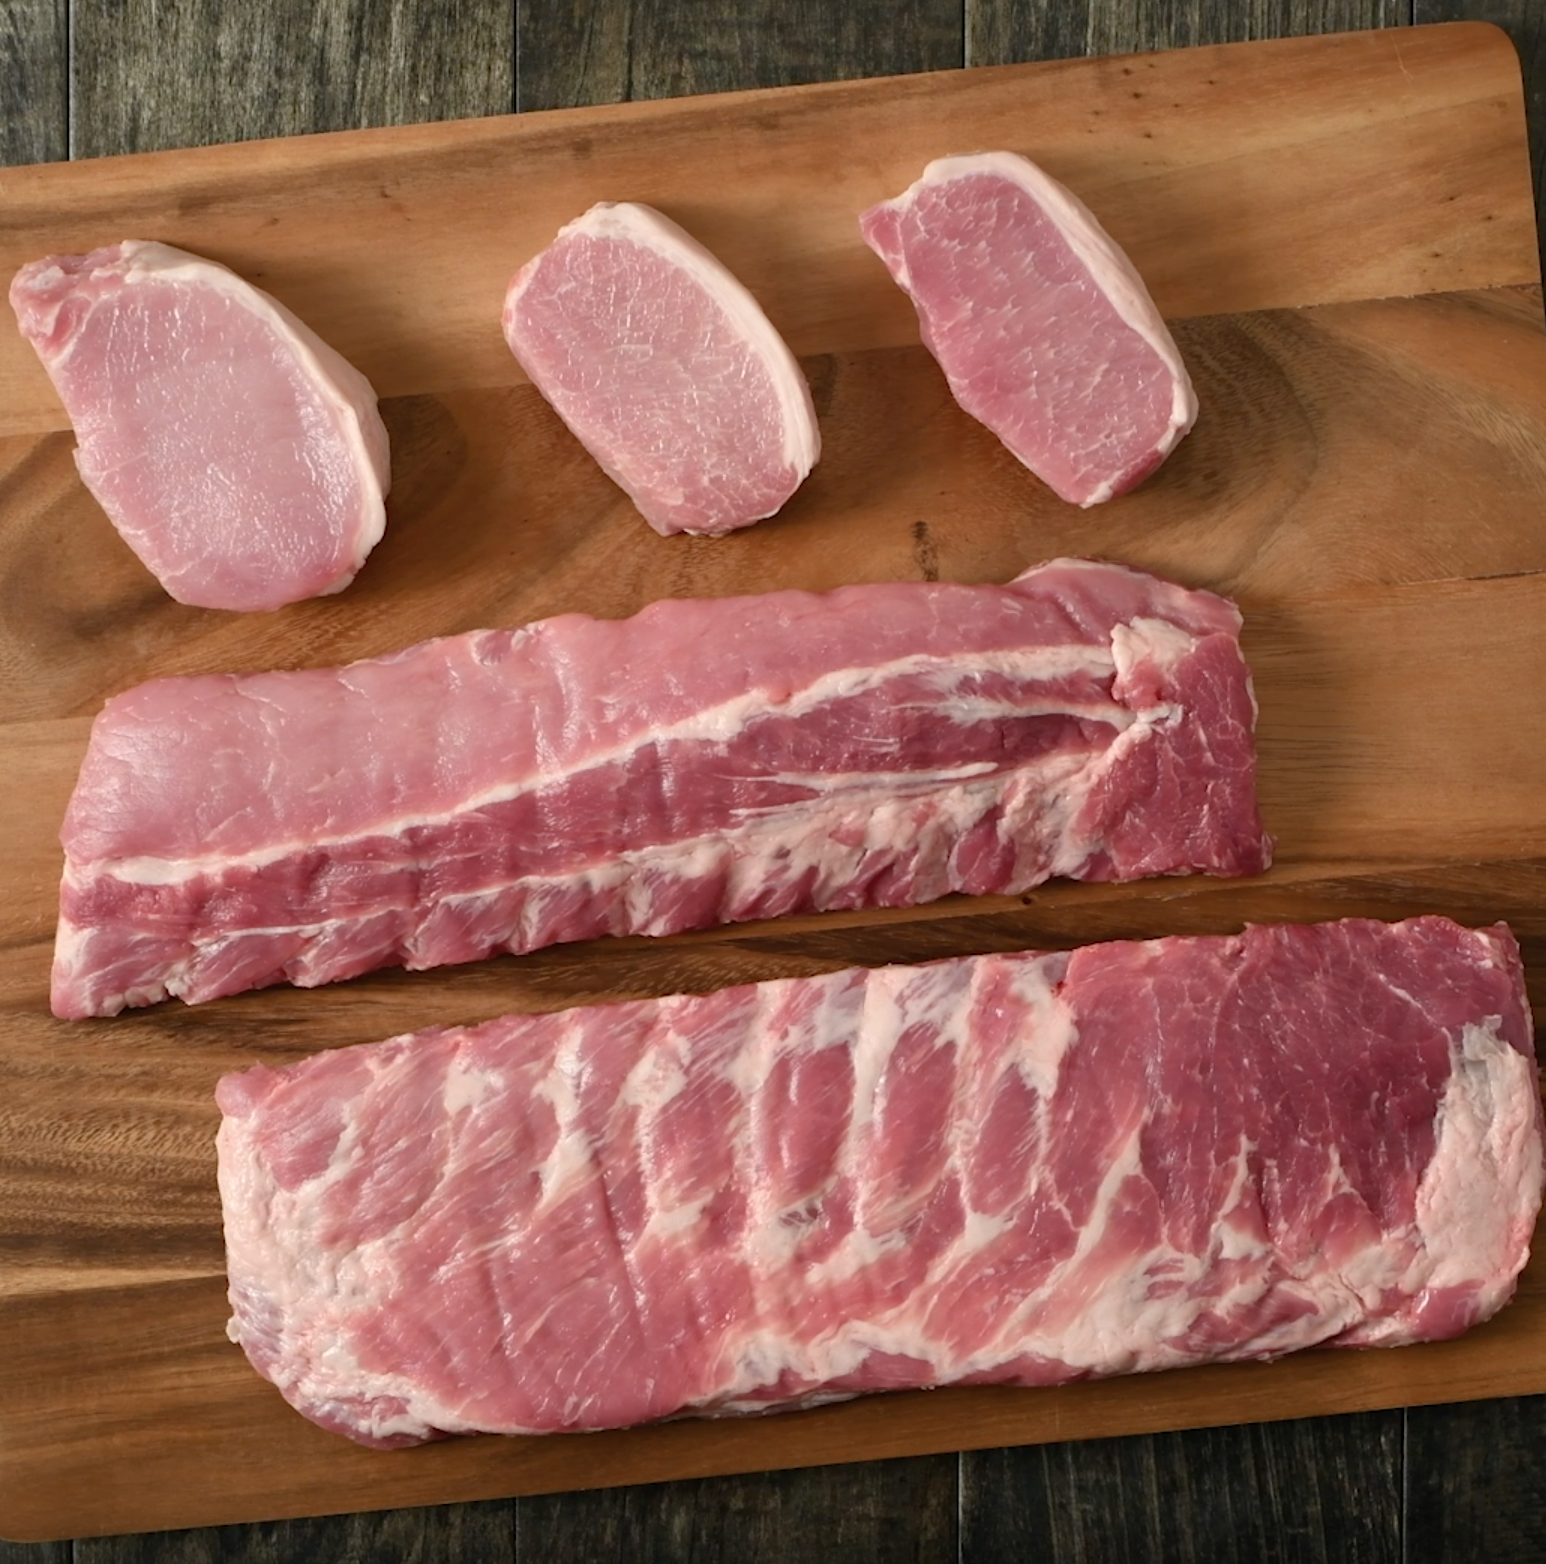 What To Look For When Buying Pork